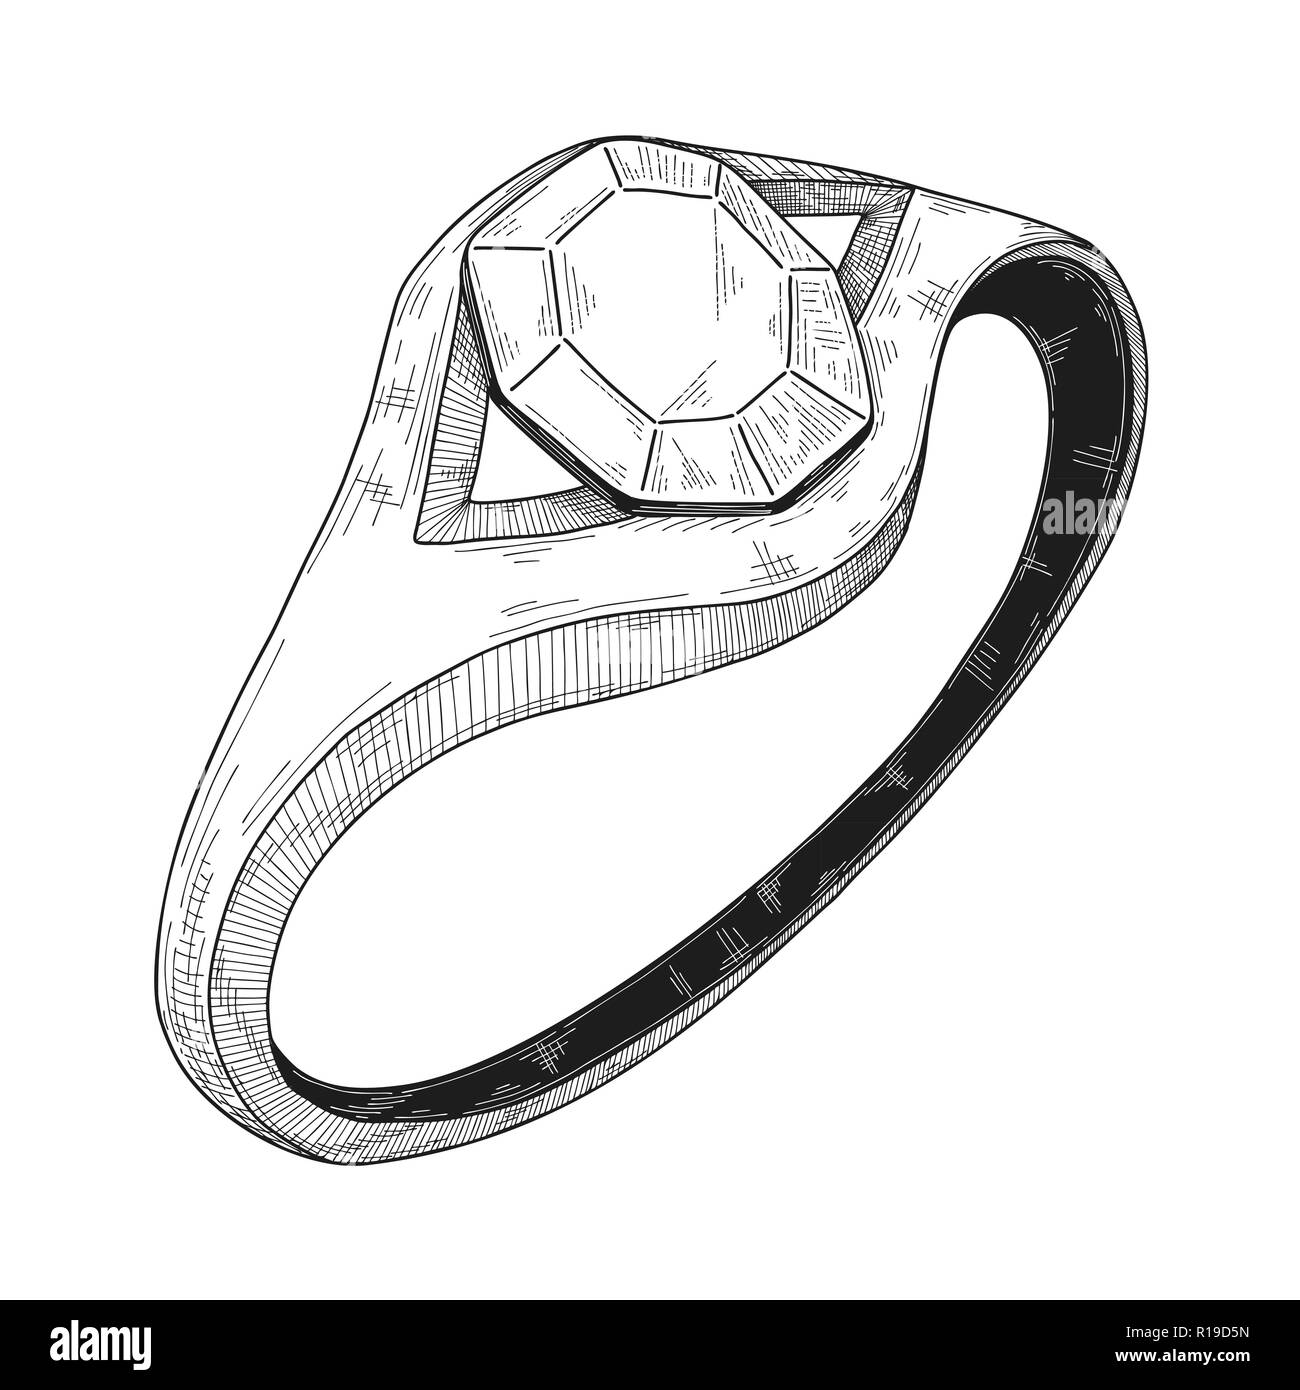 Ring Design Sketch Stock Illustrations, Cliparts and Royalty Free Ring  Design Sketch Vectors